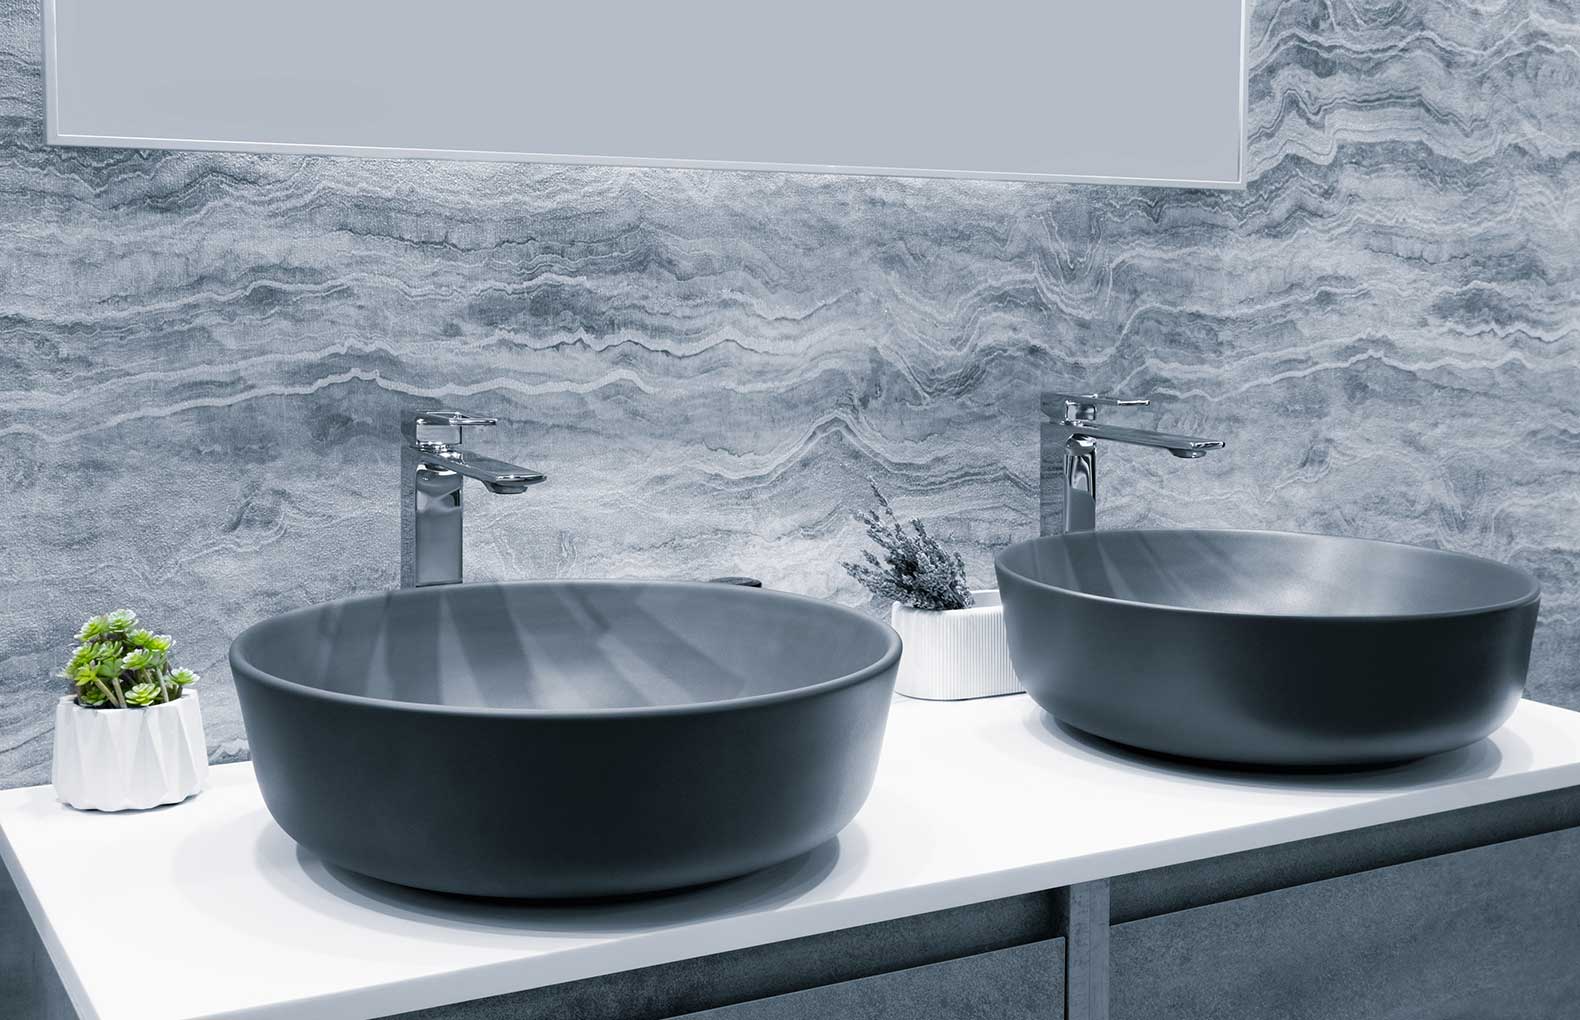 The Difference between Ceramic & Porcelain Sinks